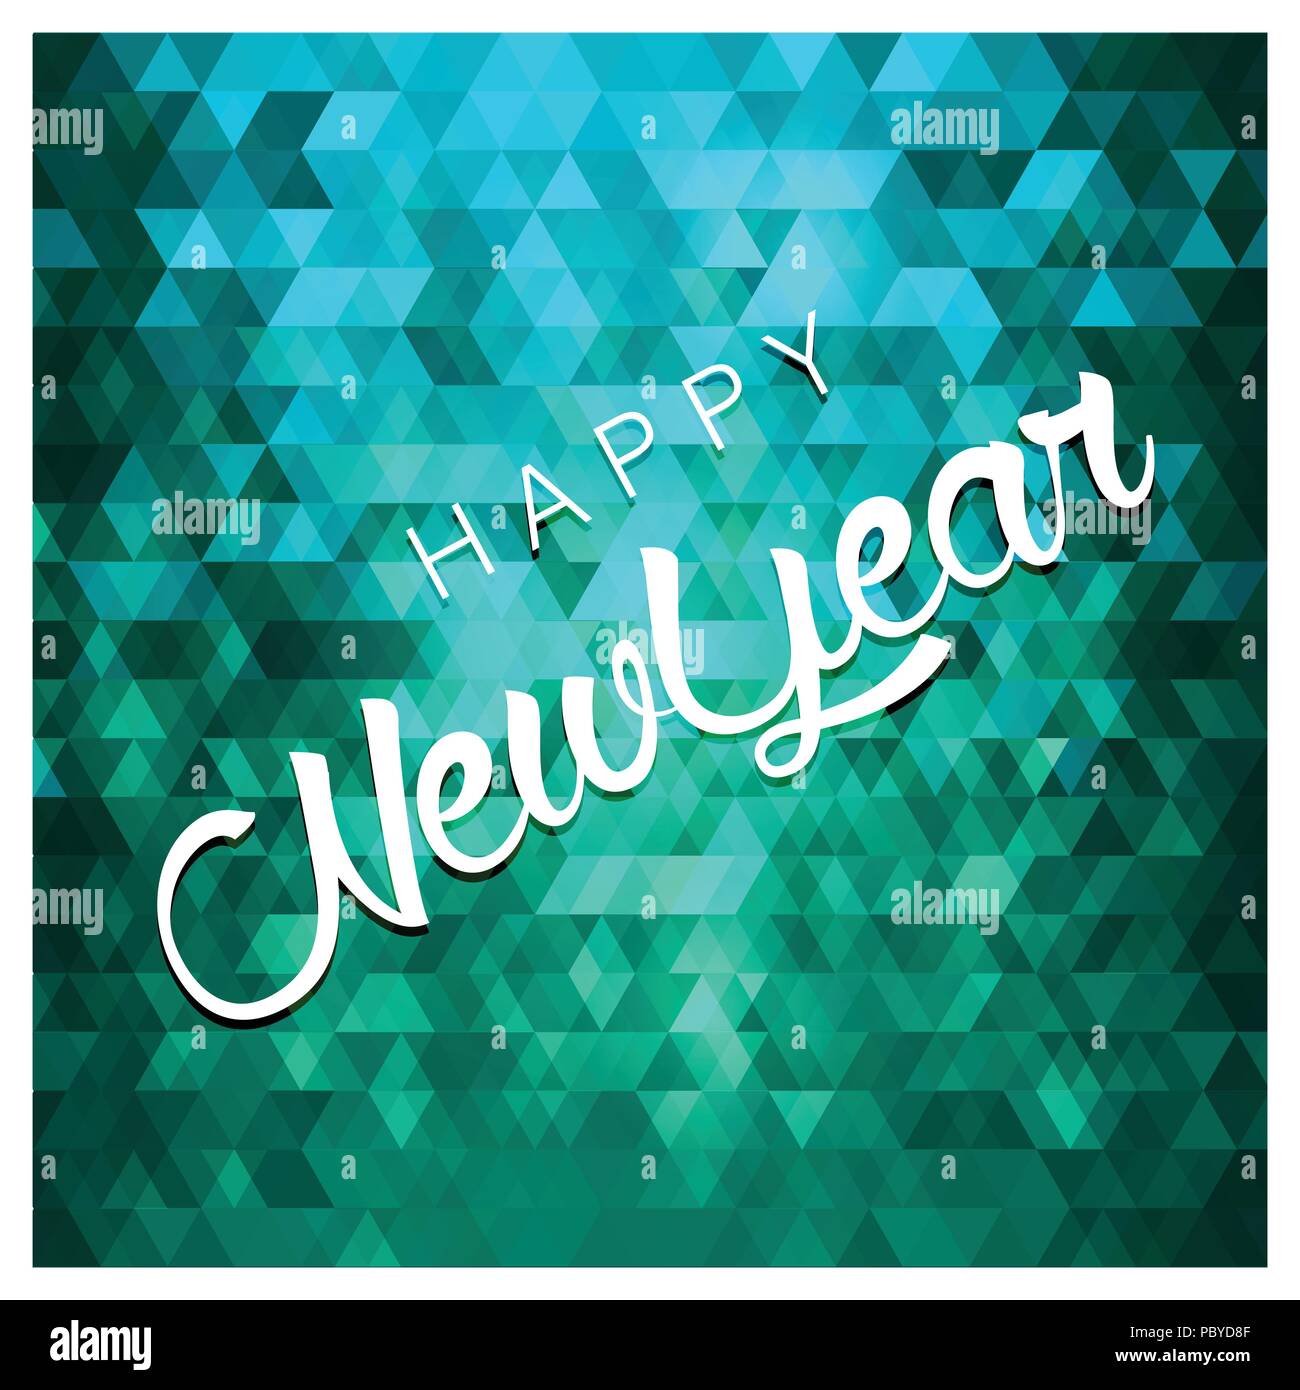 Happy New Year Typography with abstract background design vector Stock Vector